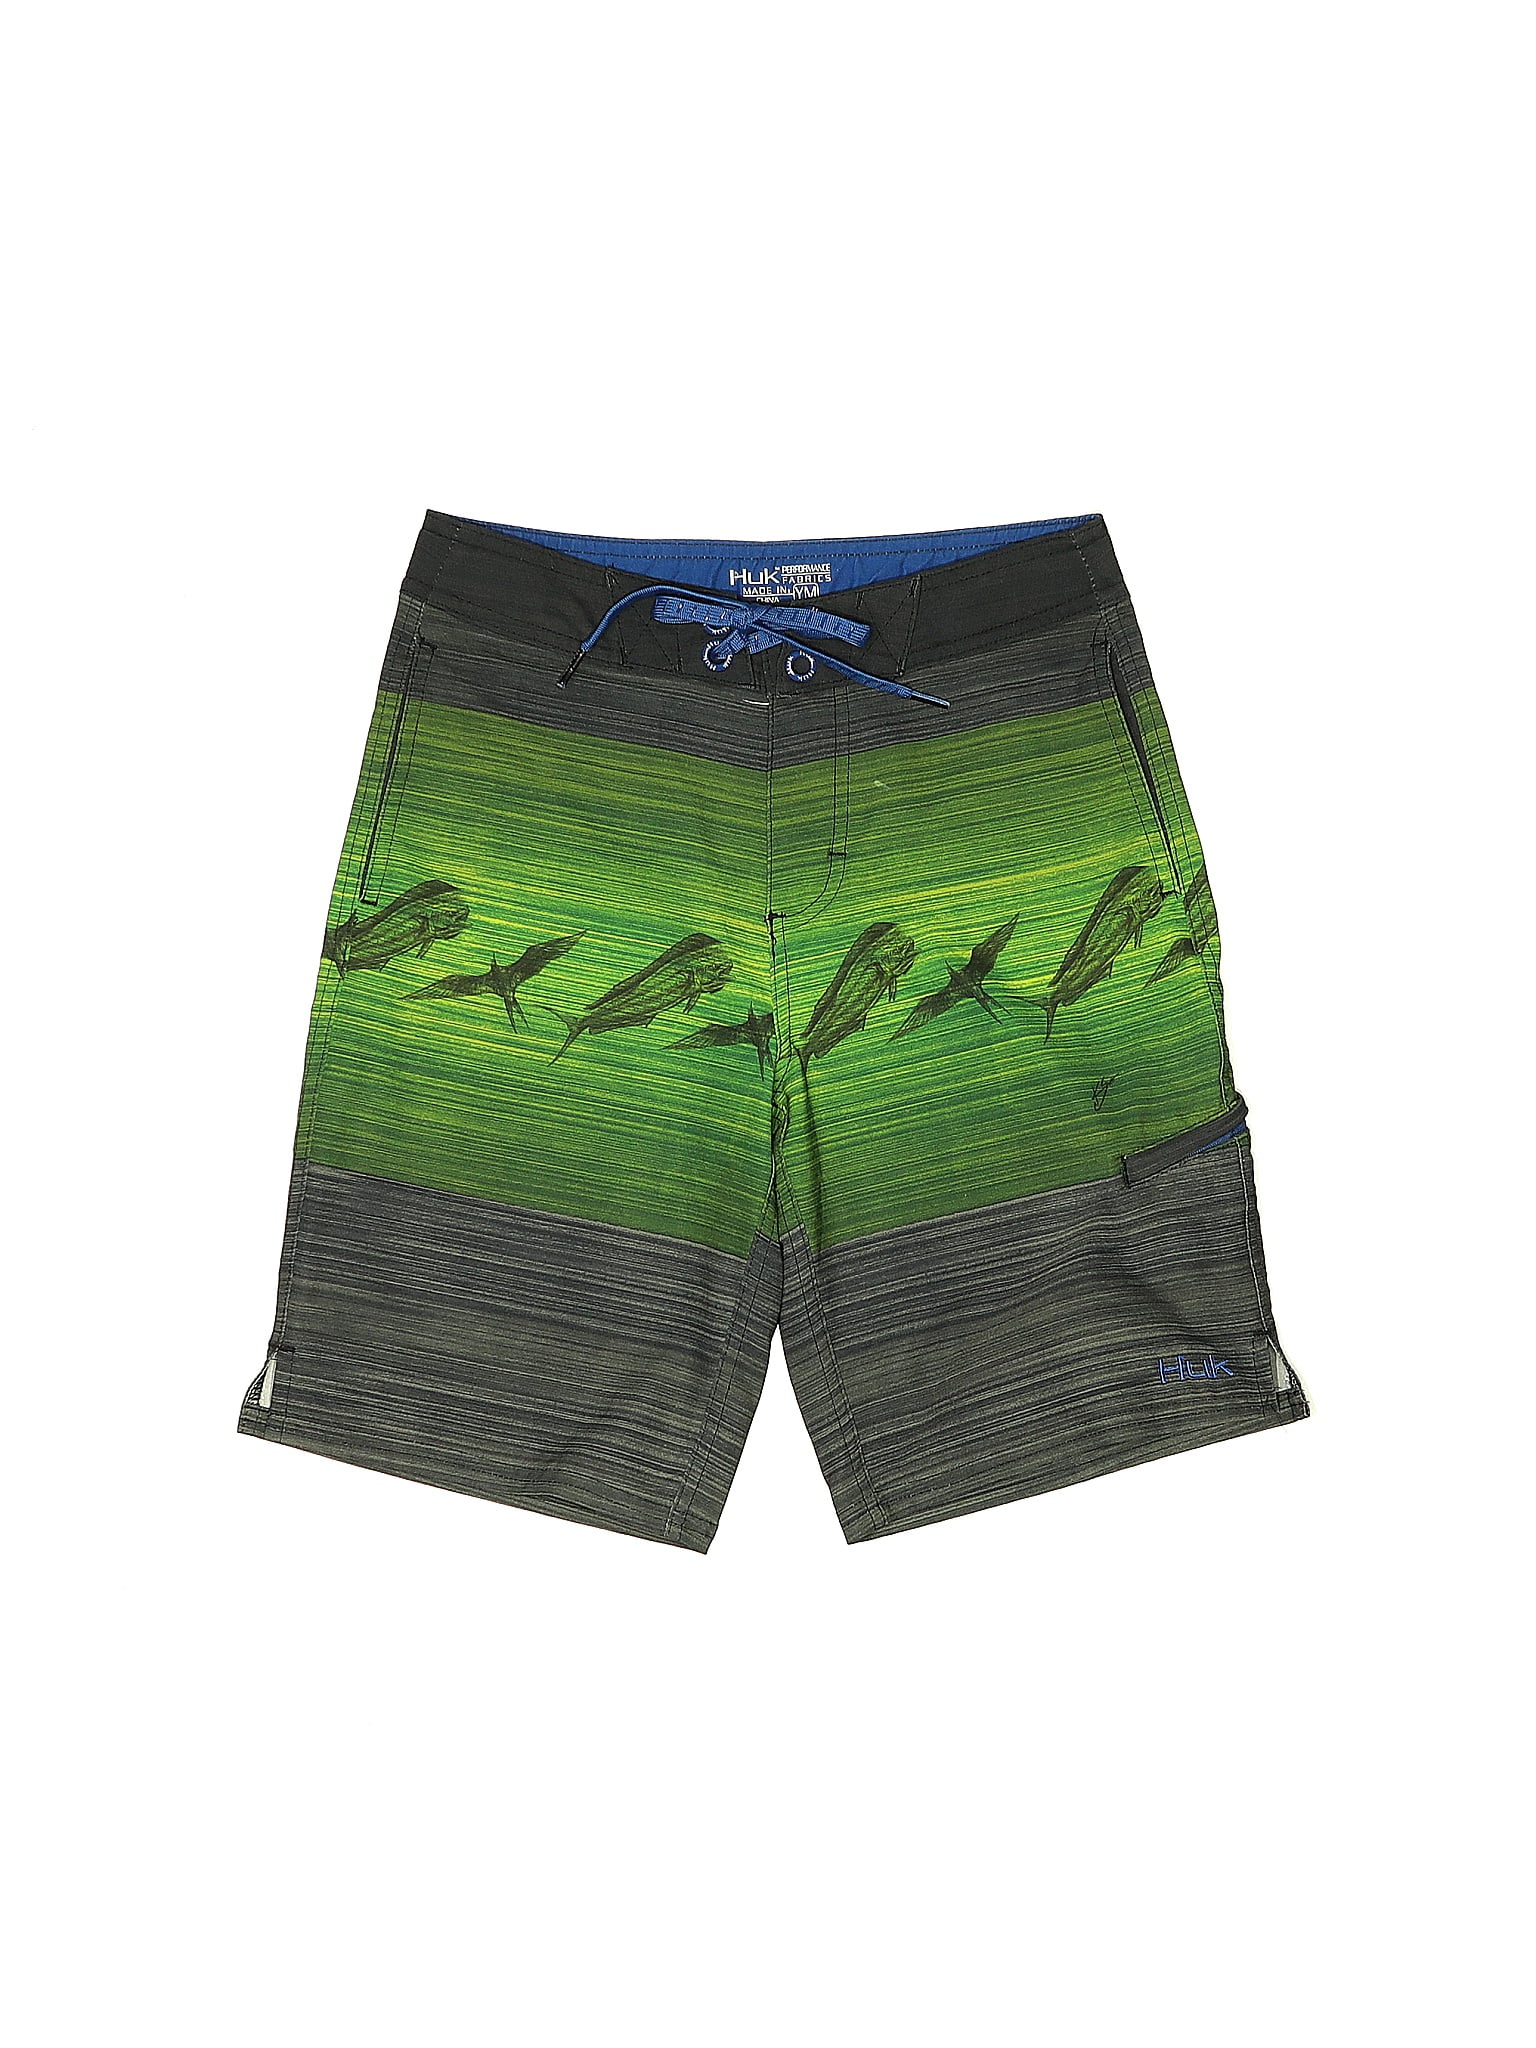 HUK Stripes Green Board Shorts Size M (Youth) - 54% off